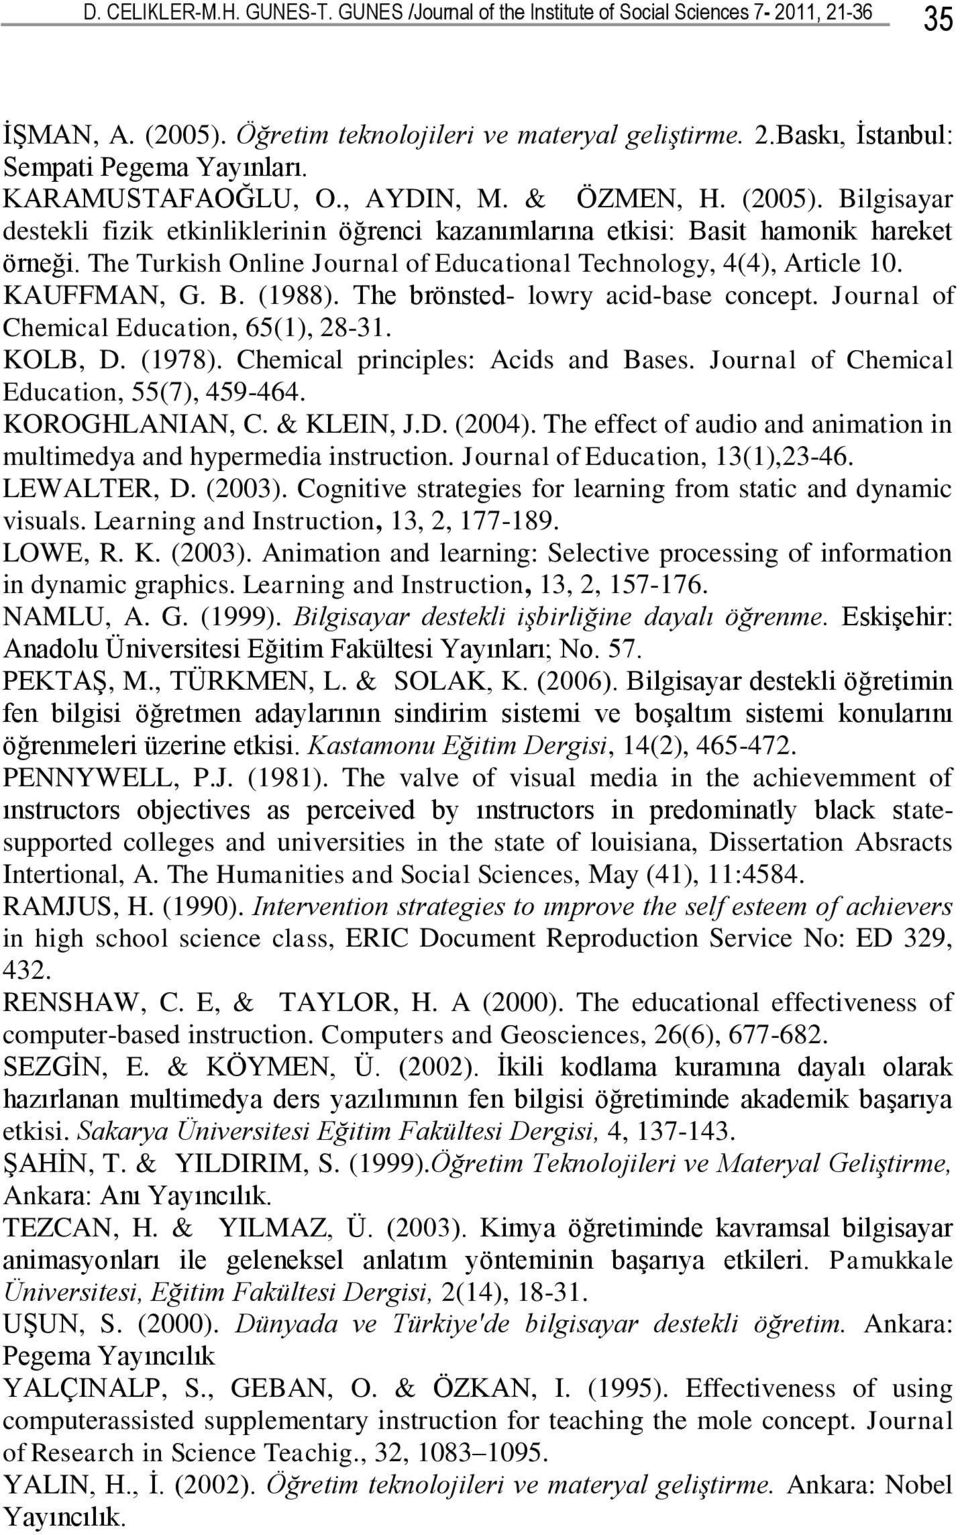 The Turkish Online Journal of Educational Technology, 4(4), Article 10. KAUFFMAN, G. B. (1988). The brönsted- lowry acid-base concept. Journal of Chemical Education, 65(1), 28-31. KOLB, D. (1978).